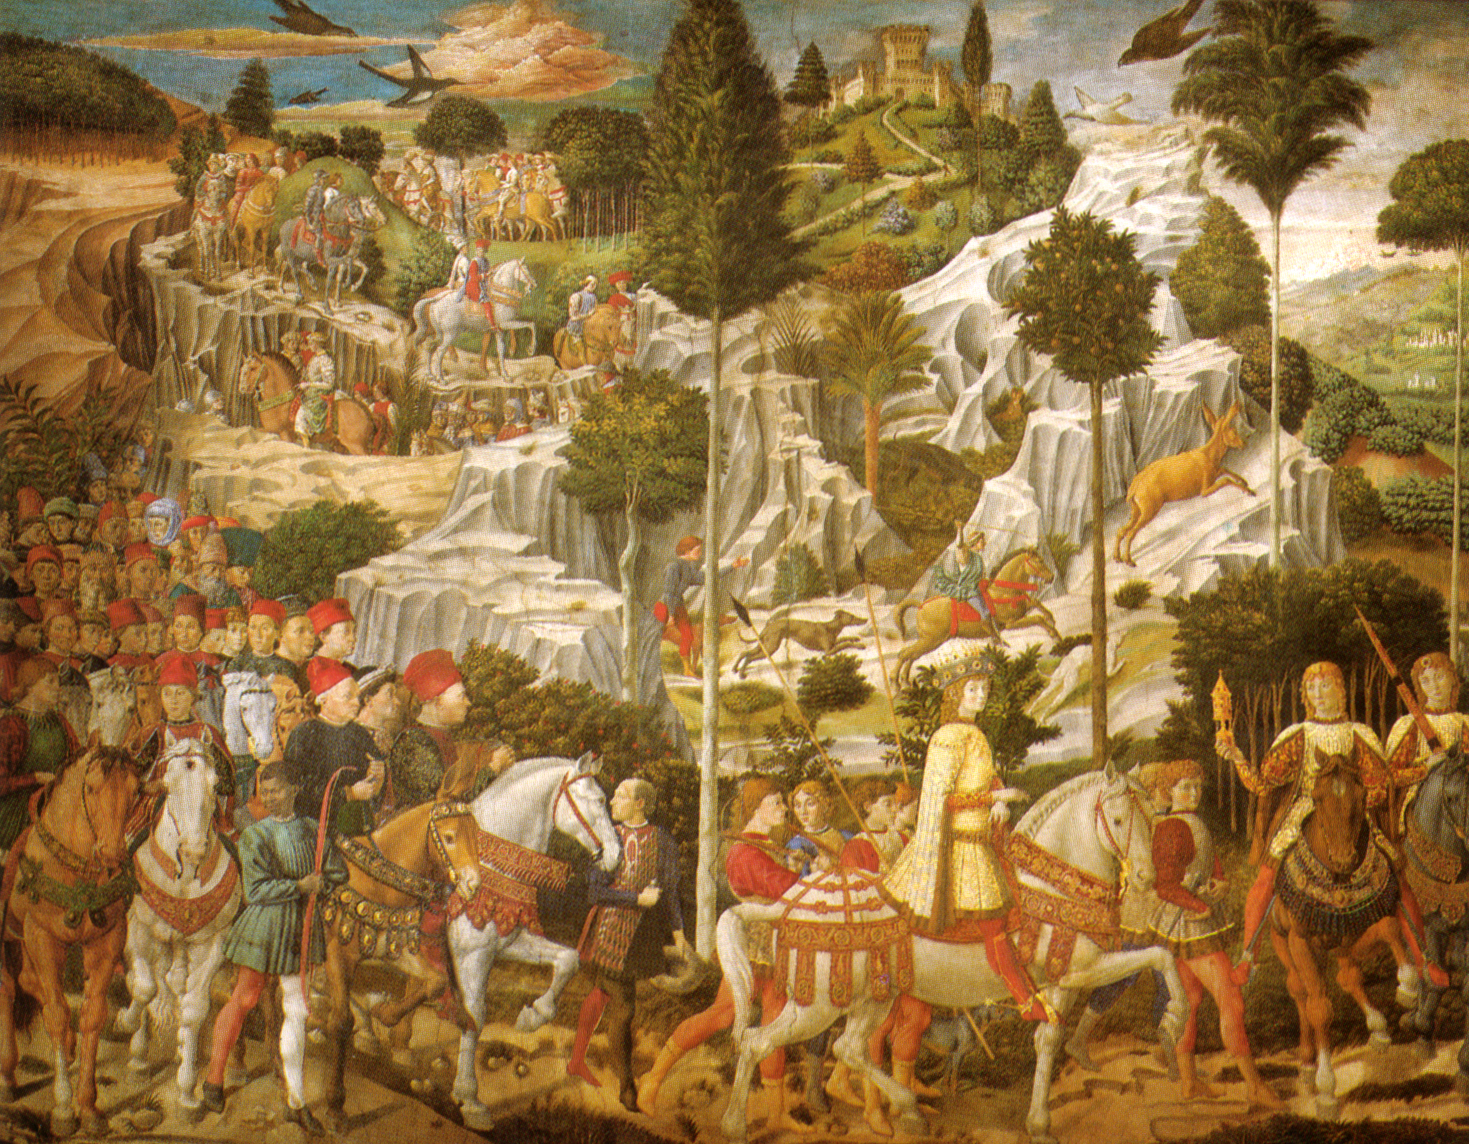 Benozzo Gozzoli, Procession led by Lorenzo the Magnificent, Chapel of the Magi, Florence